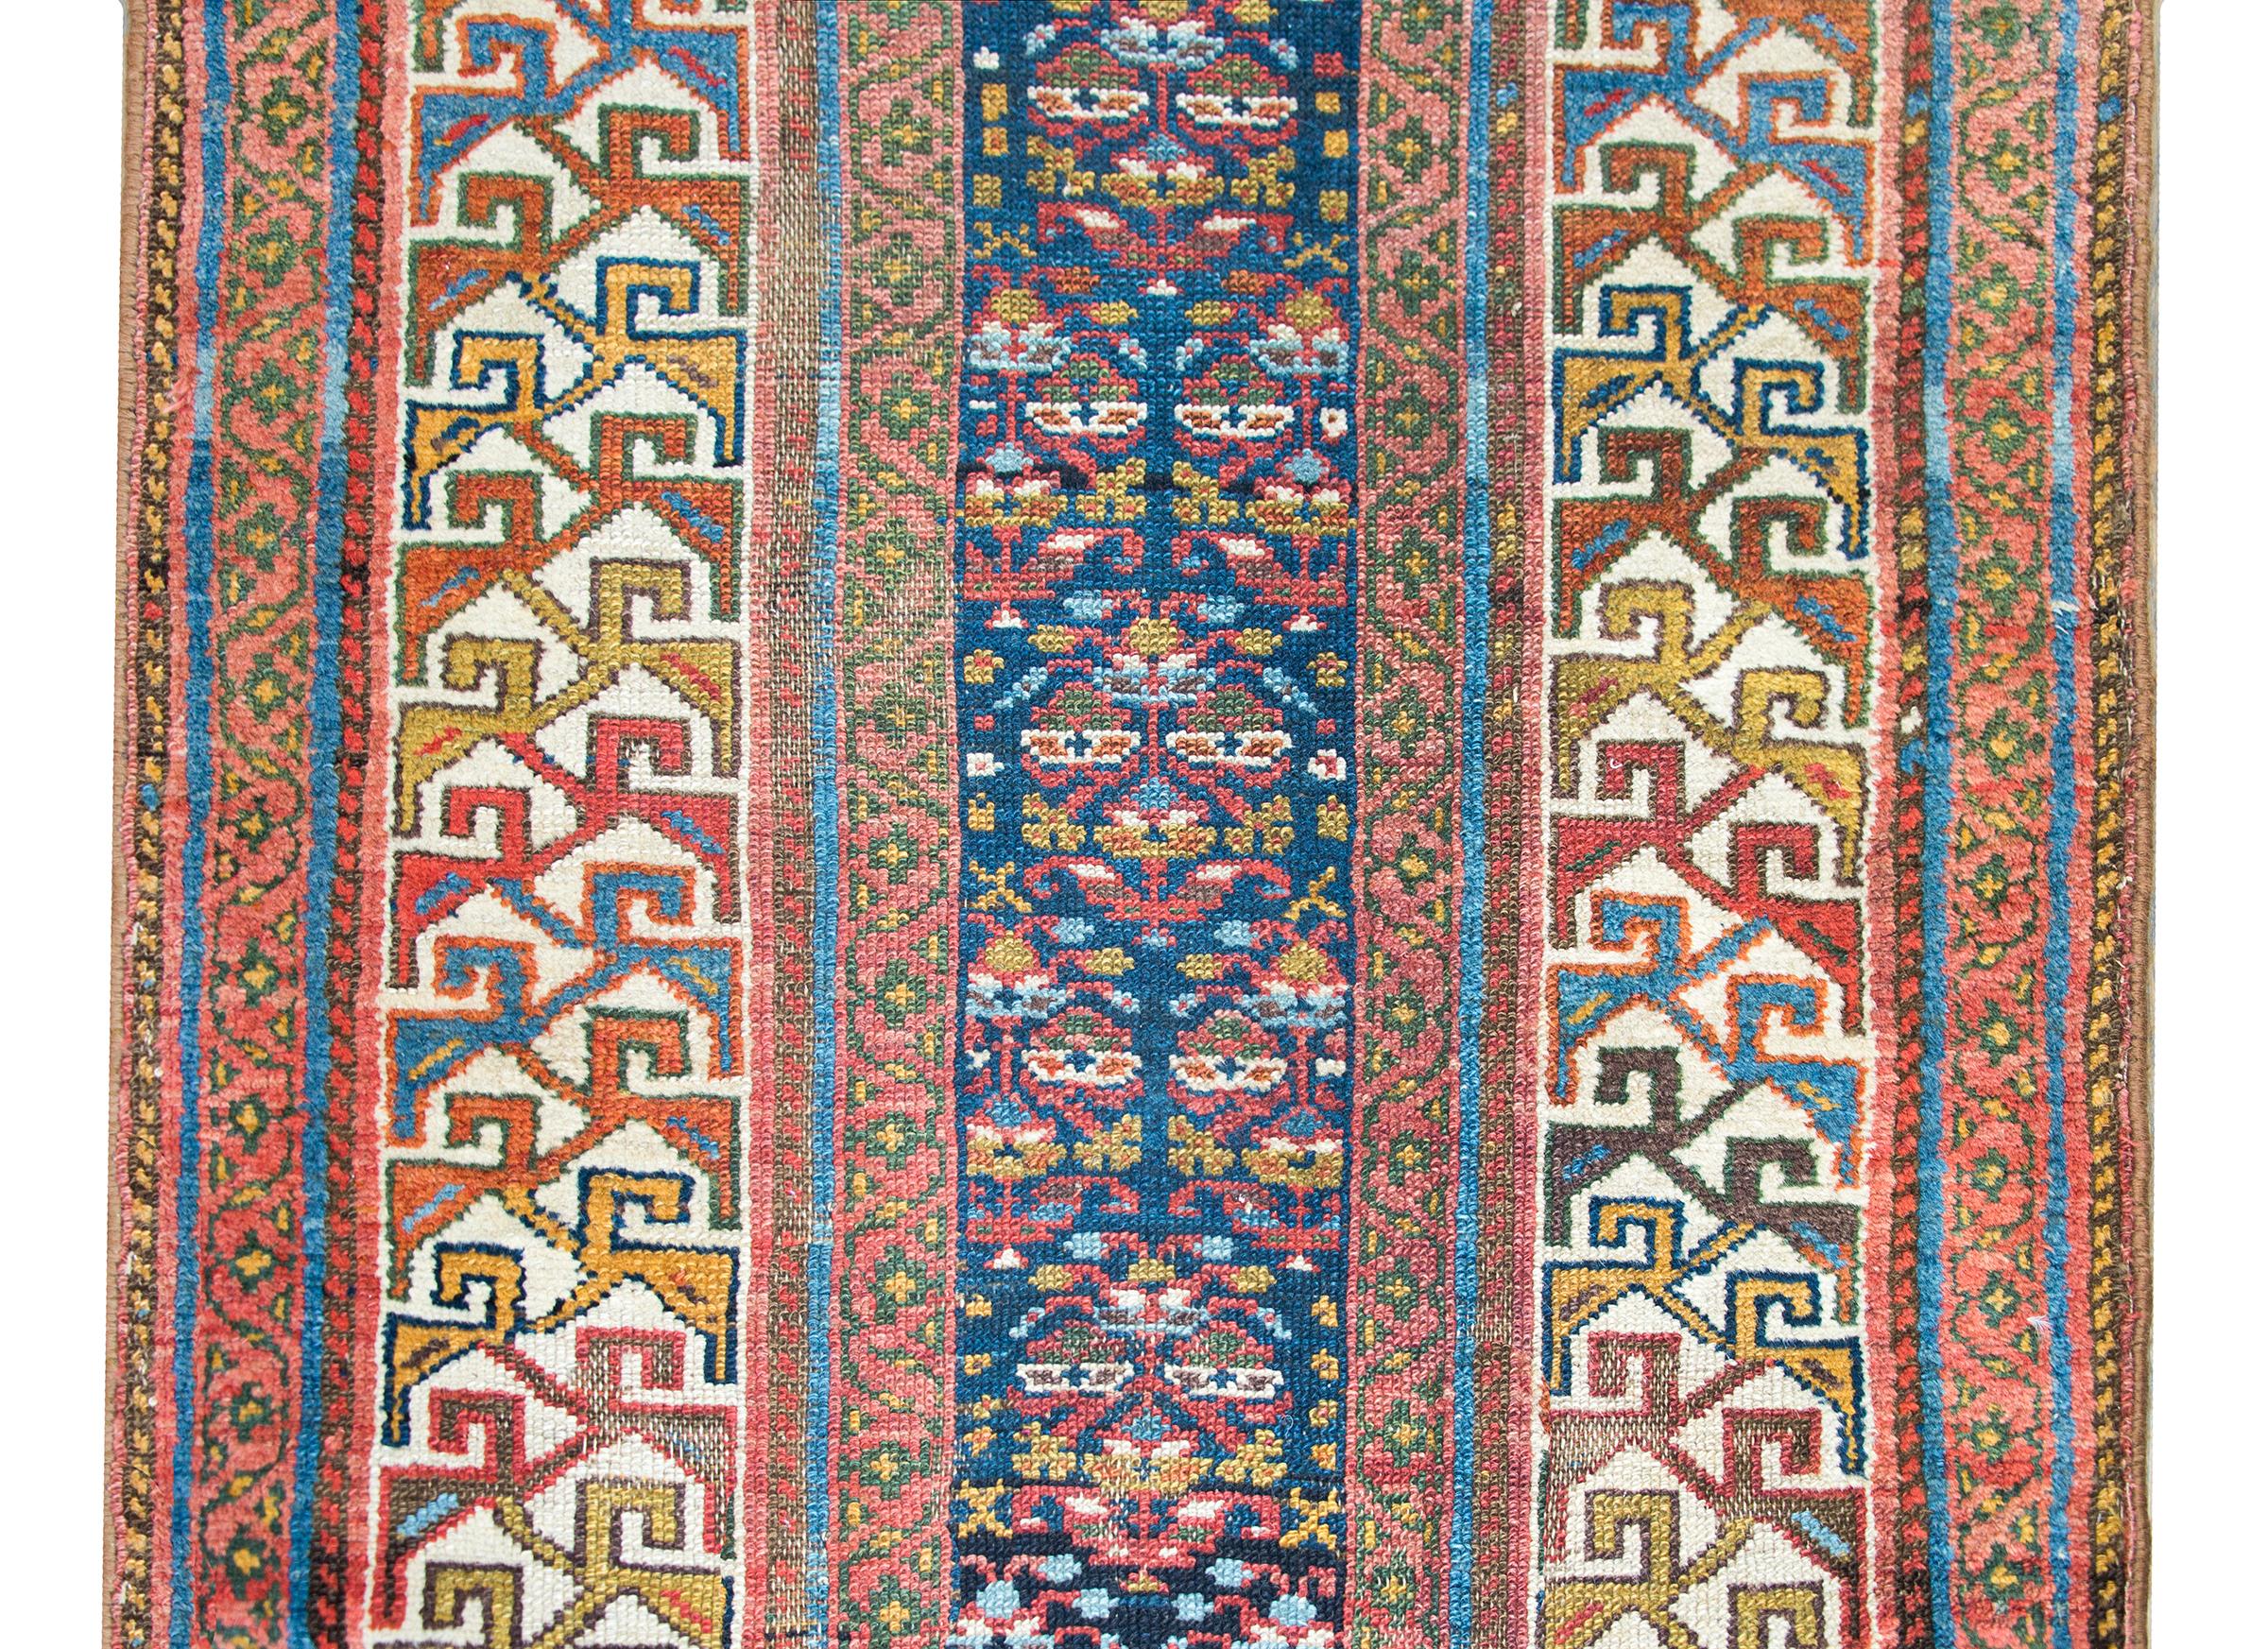 A wonderful early 20th century Persian Kurdish runner with a narrow stylized floral pattern in the center, and surrounded by a wide complex border with a wide stylized floral pattern flanked by pairs of petite geometric and floral patterned stripes.